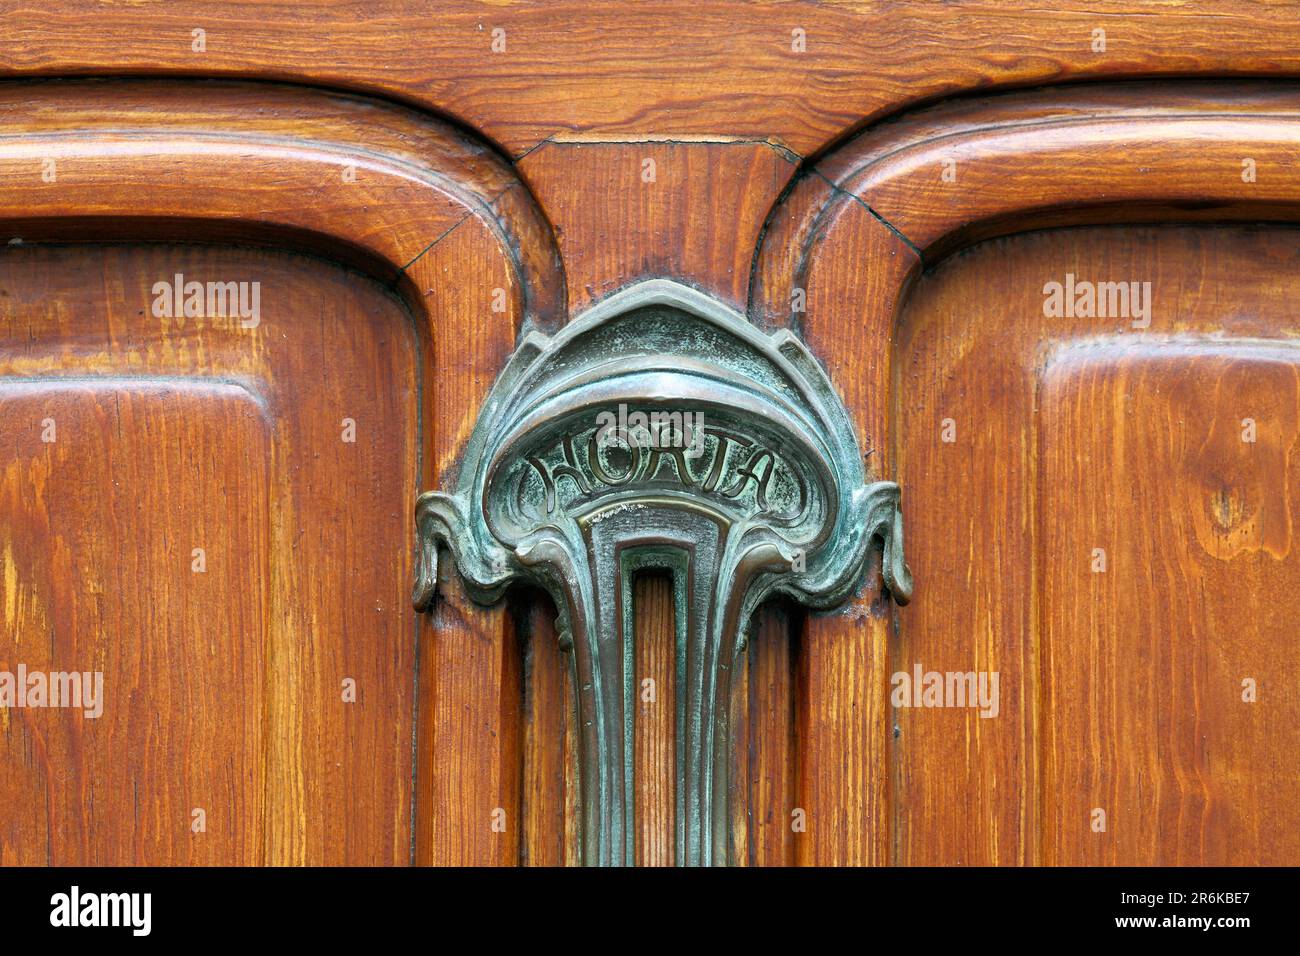 Close up of an art nouveau door knocker at the Horta Museum in Brussels, the former home and studio of architect Victor Horta. Stock Photo